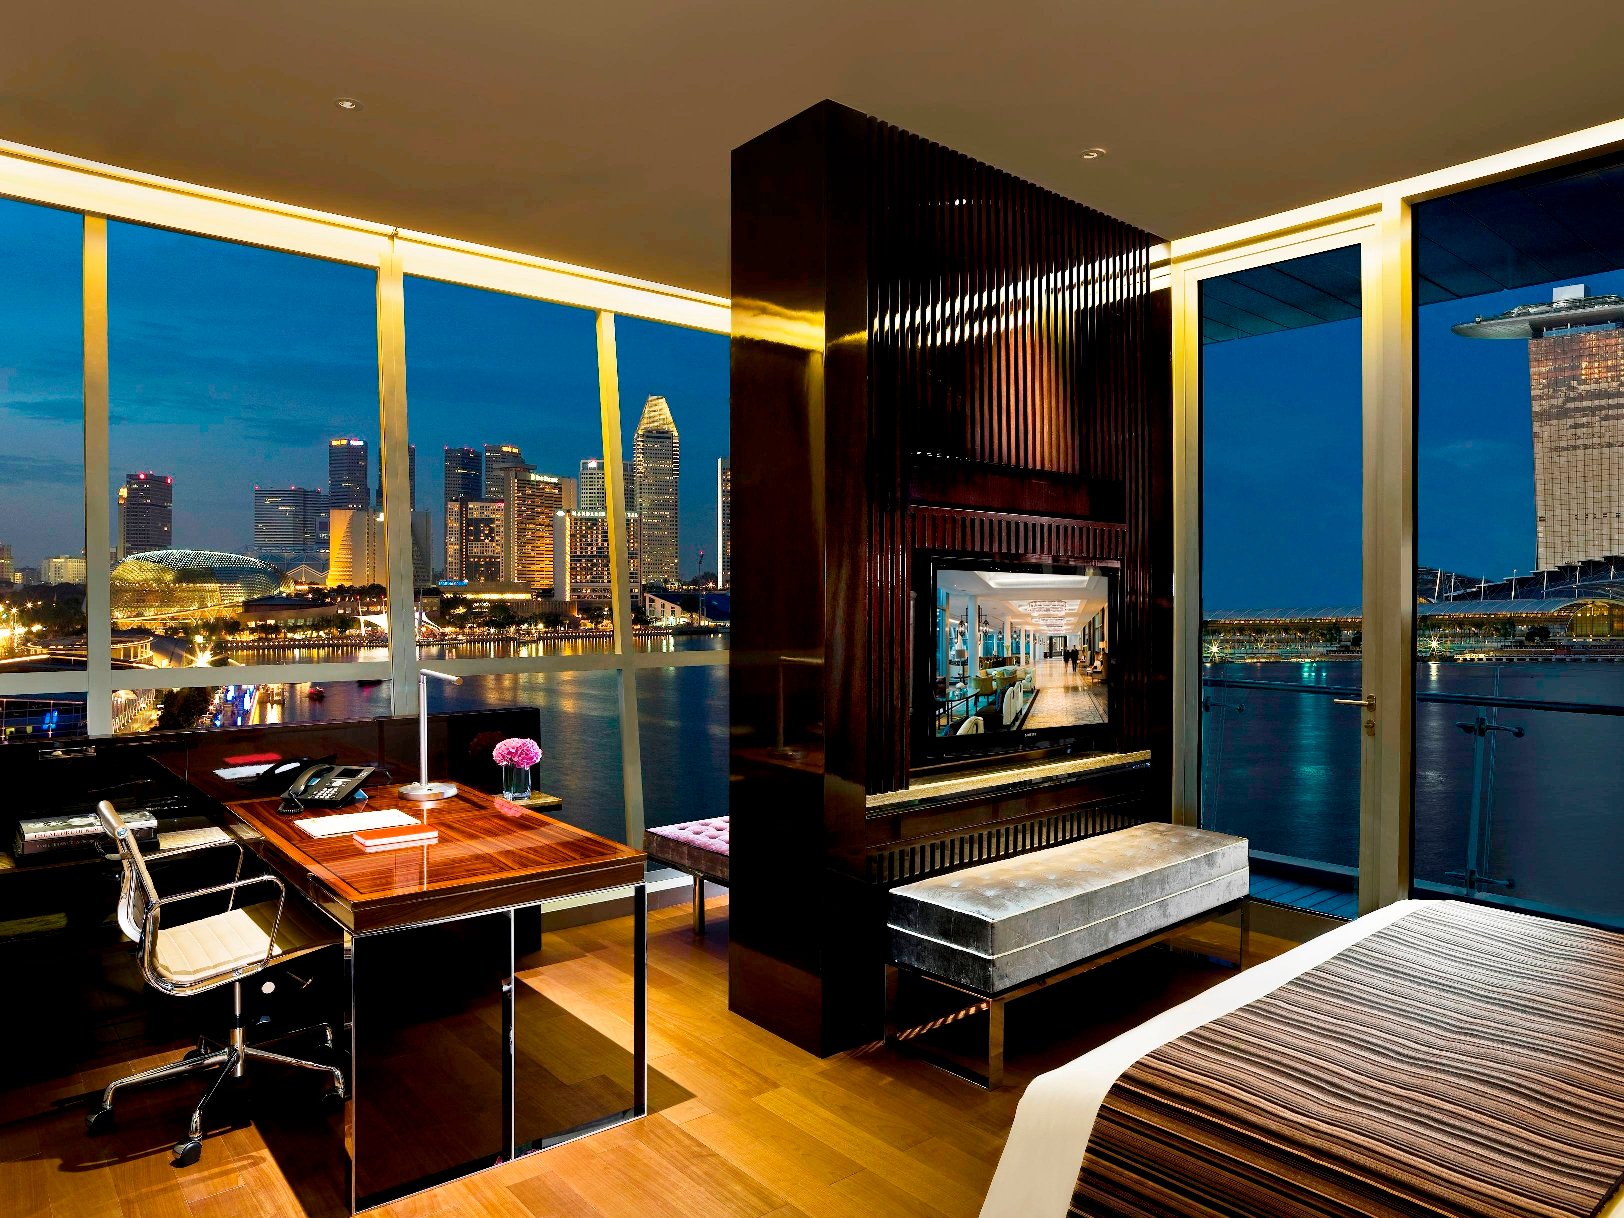 The Fullerton Bay Hotel offers enviable views of Marina Bay